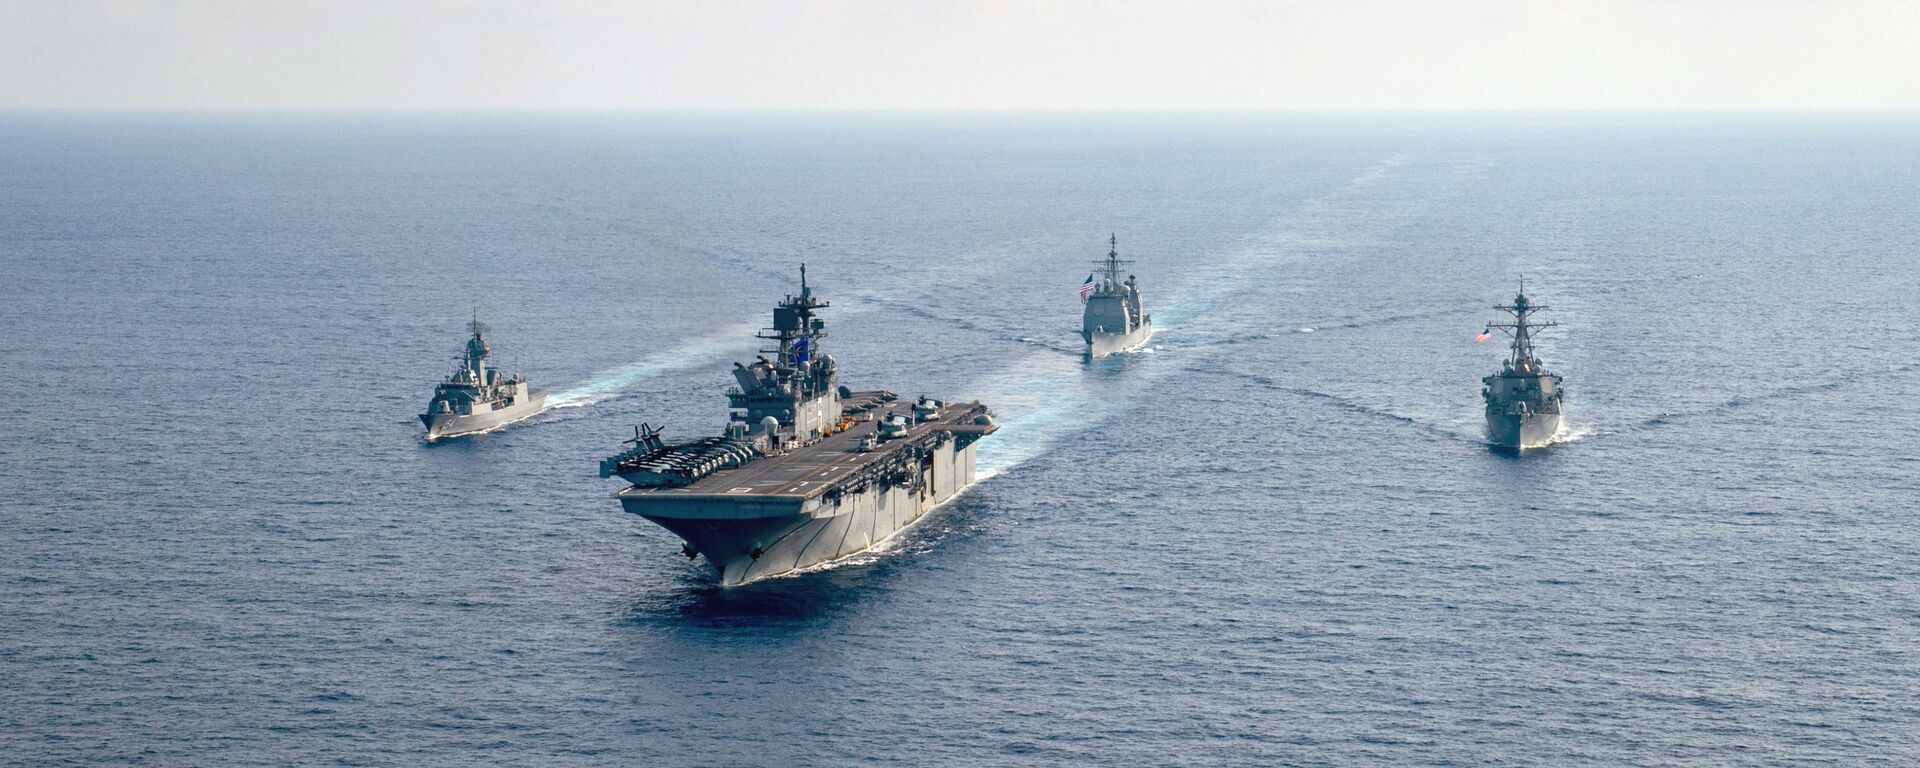 The Royal Australian Navy guided-missile frigate HMAS Parramatta (FFH 154), left, is underway with the U.S. Navy amphibious assault ship USS America (LHA 6), the Ticonderoga-class guided-missile cruiser USS Bunker Hill (CG 52) and the Arleigh-Burke-class guided-missile destroyer USS Barry (DDG 52). - Sputnik International, 1920, 16.04.2021